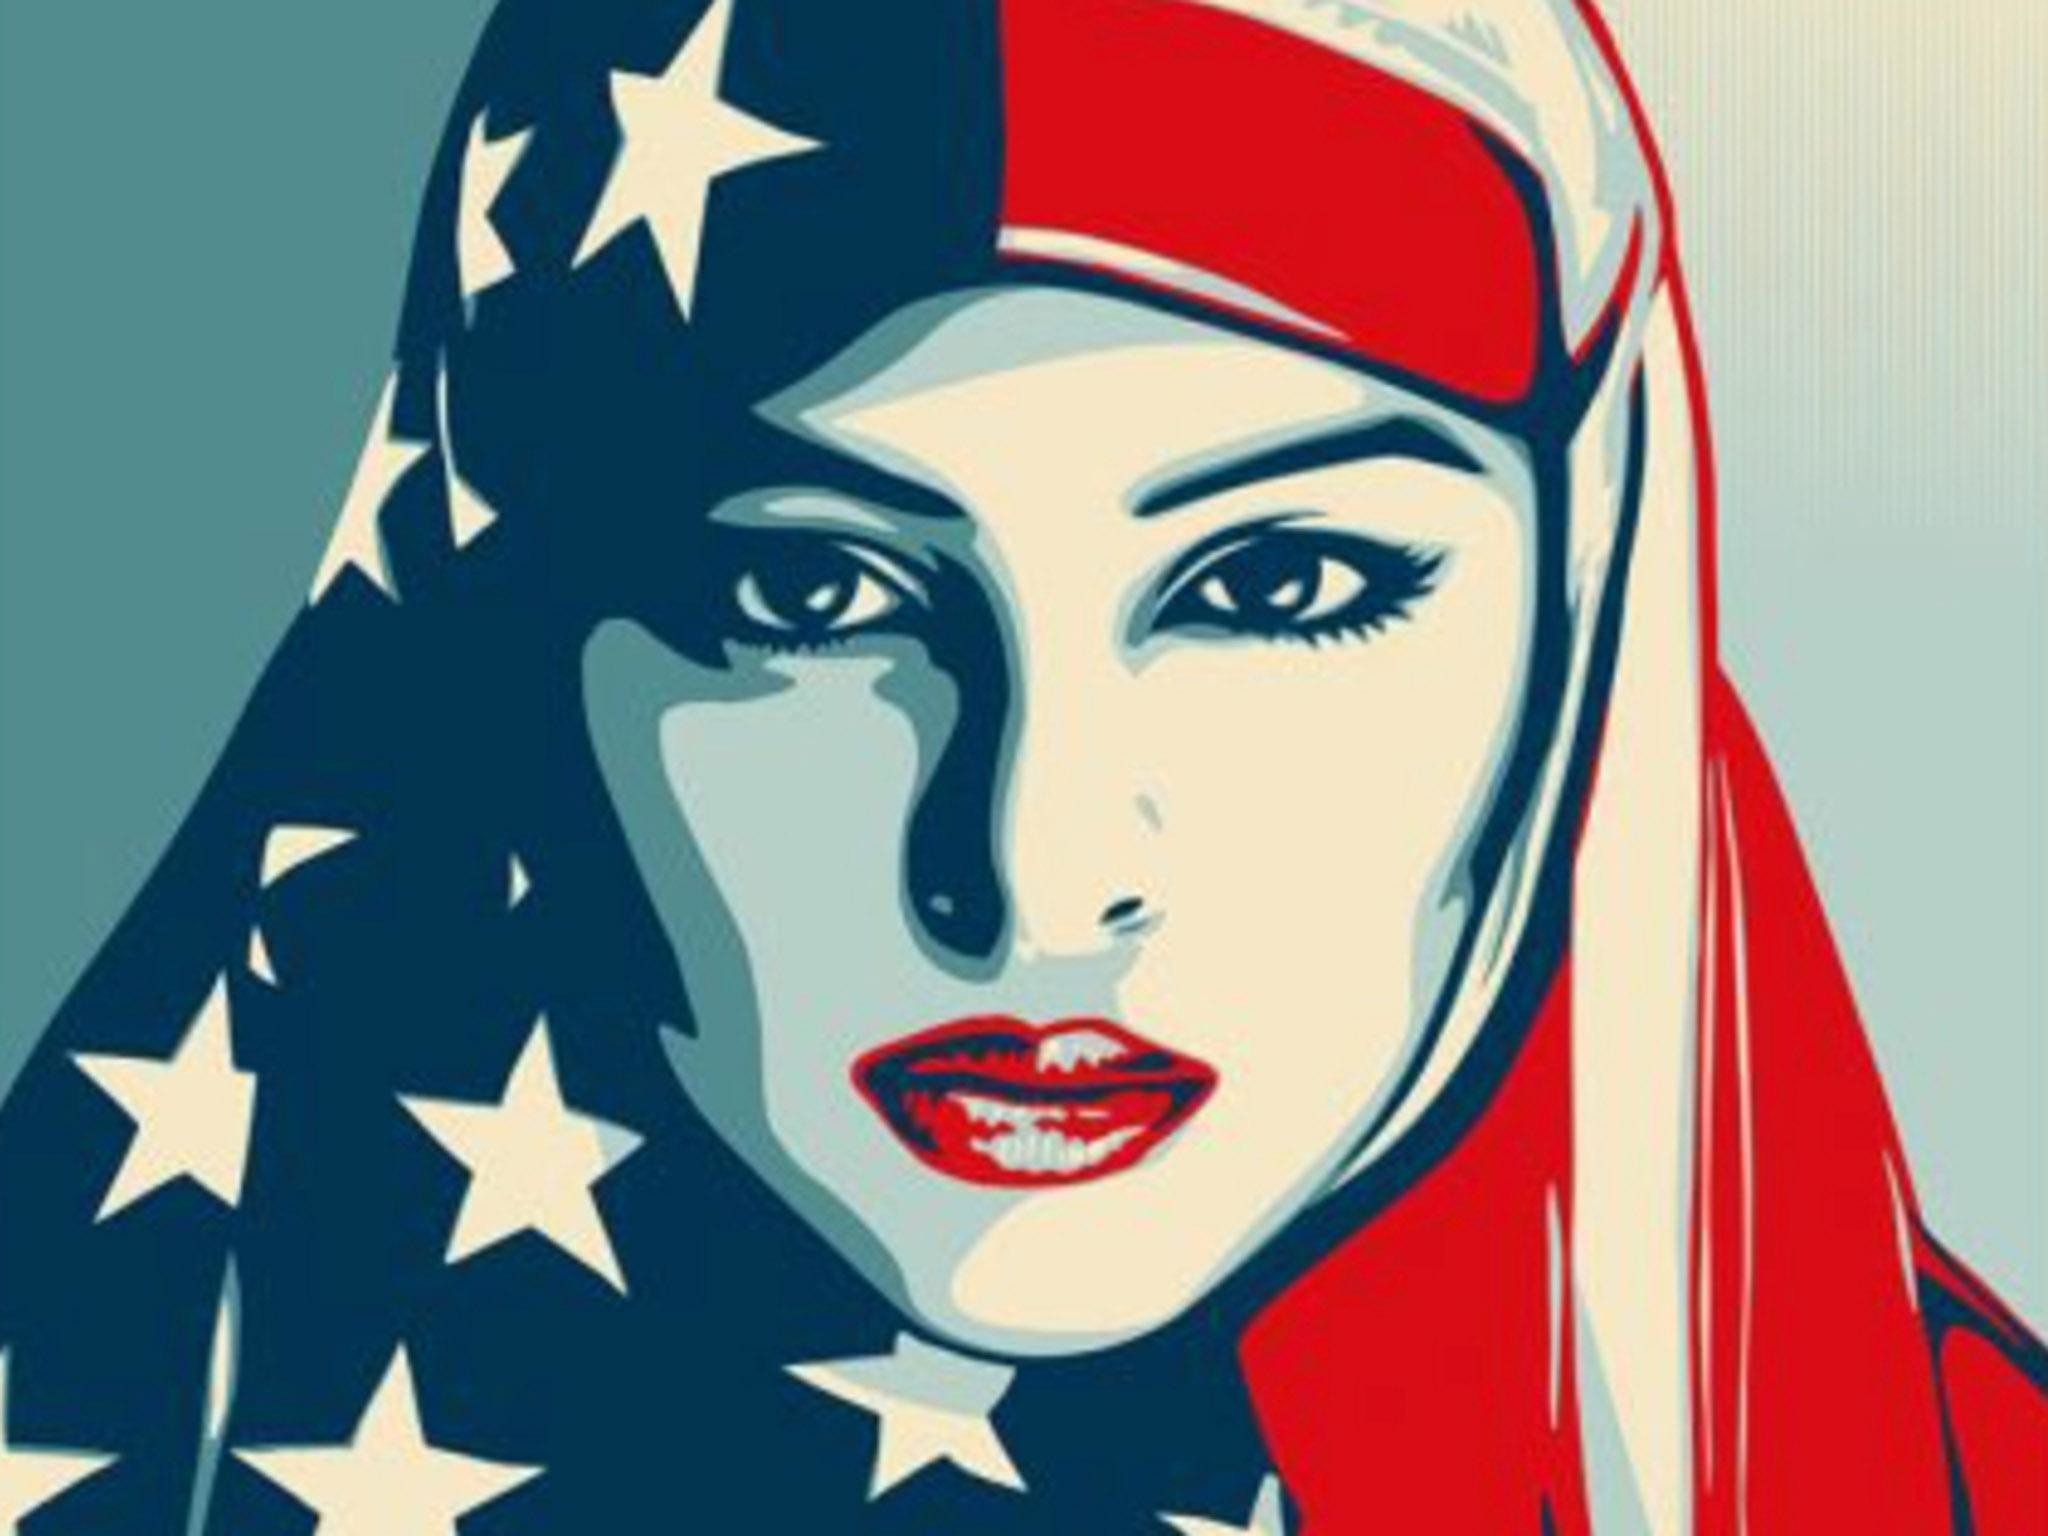 2048x1536 Shepard Fairey's inauguration posters may define political art in Trump era  | The Independent